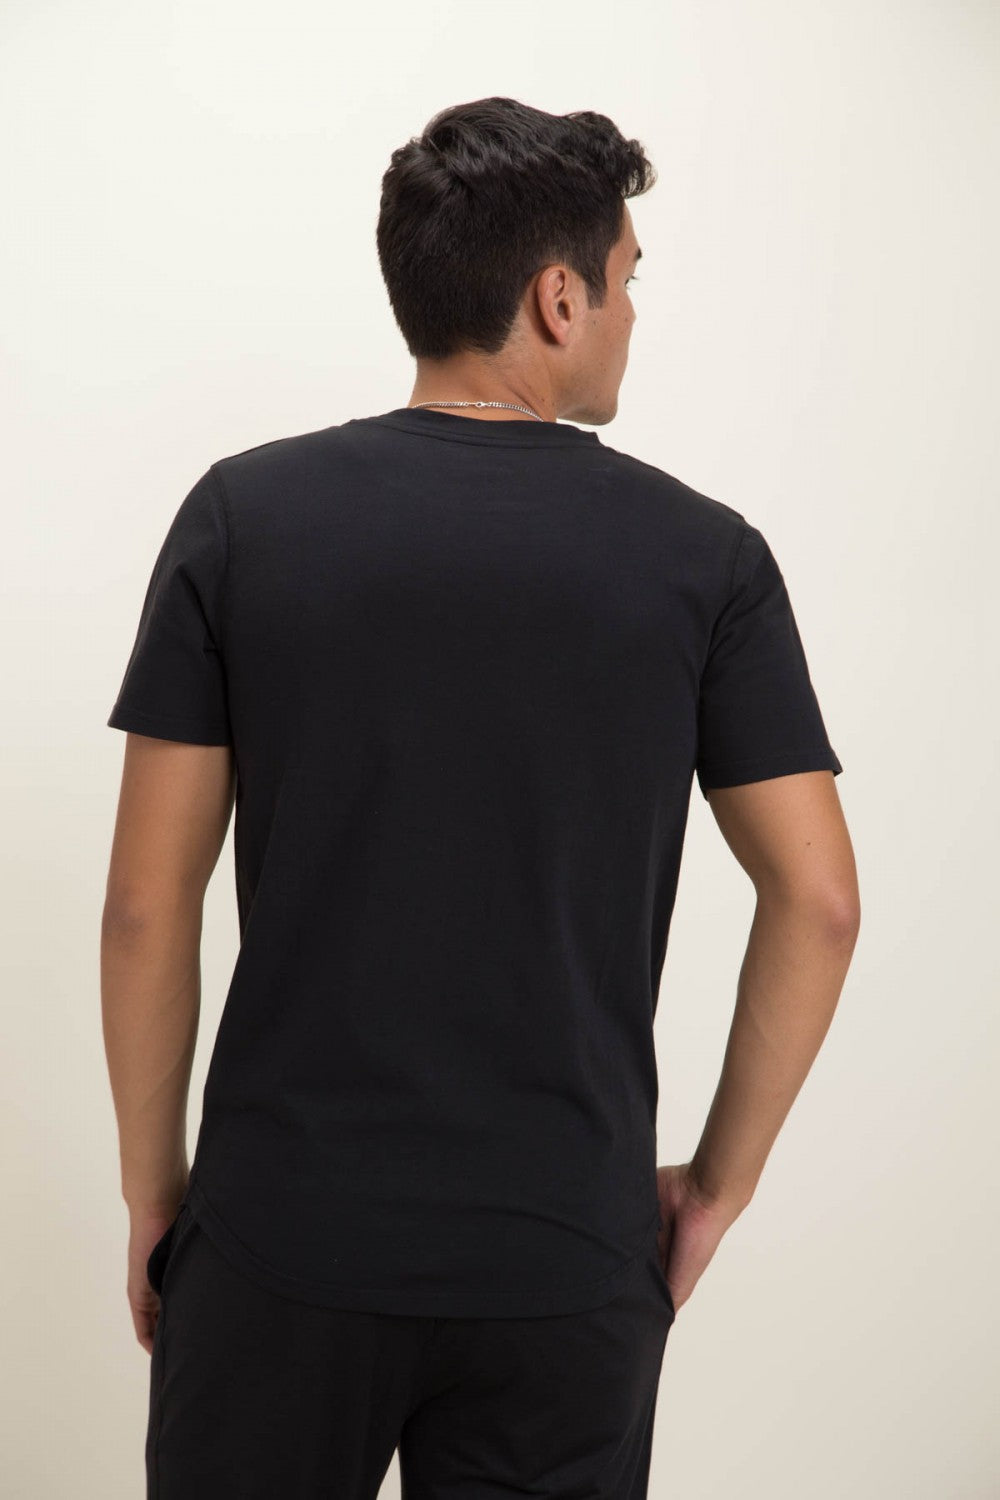 Men's Active T-Shirt with Shoulder Seaming